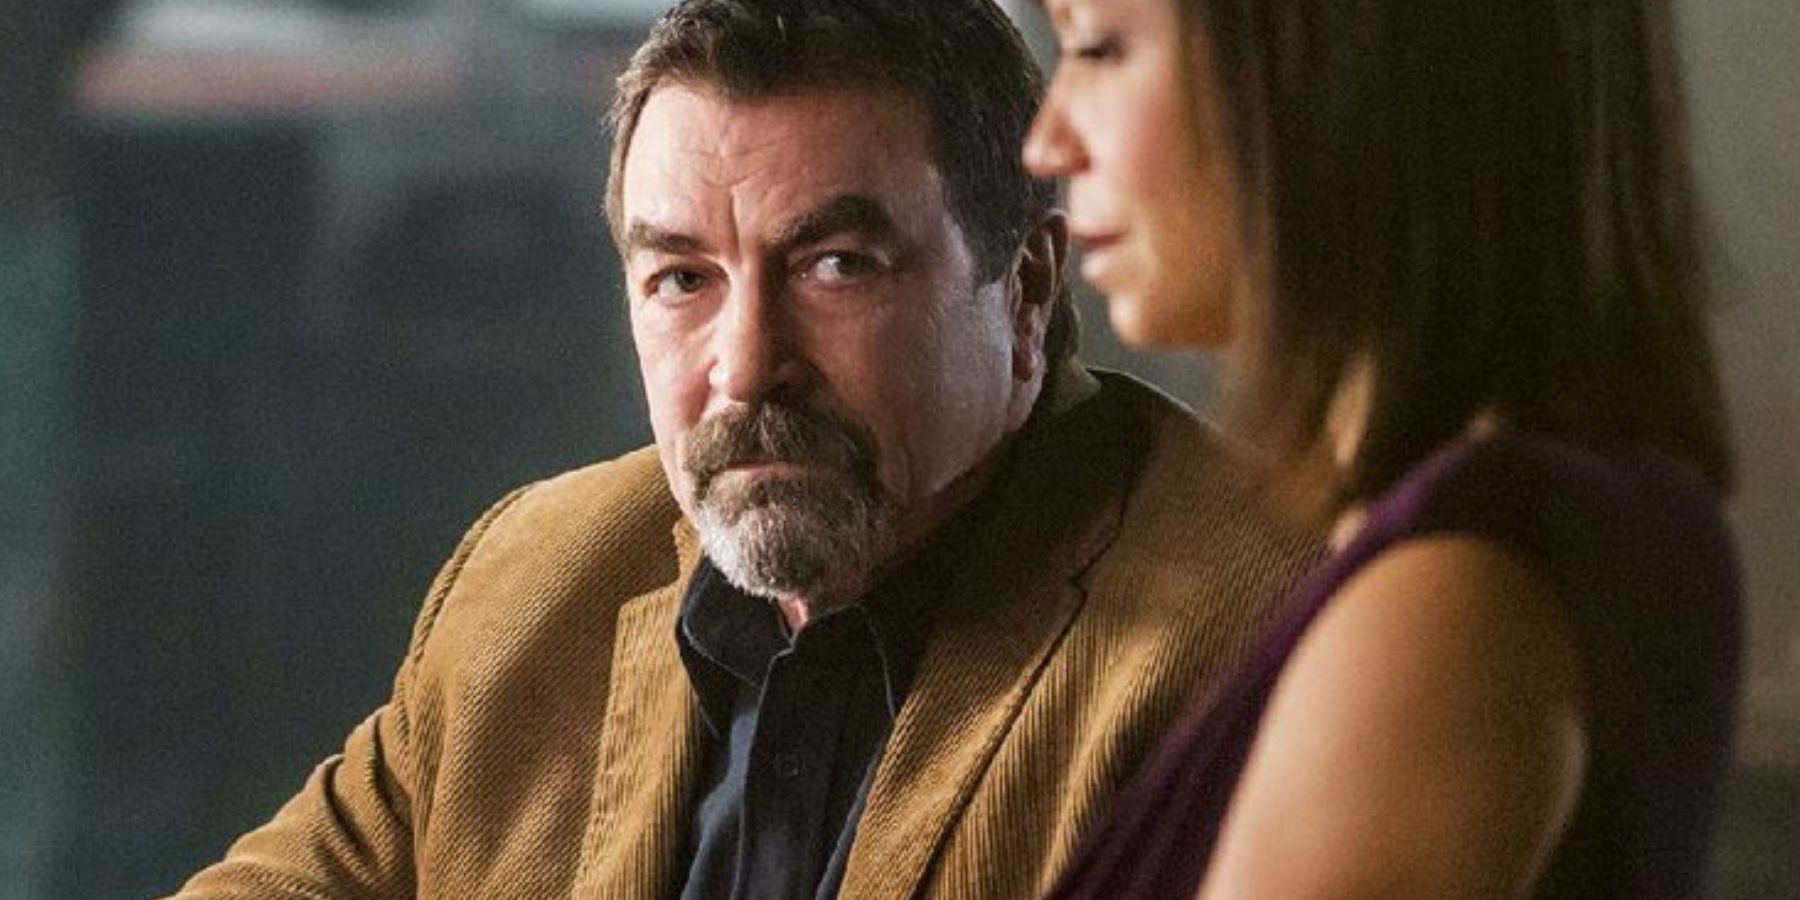 Tom Selleck as Jesse Stone drinking at a bar